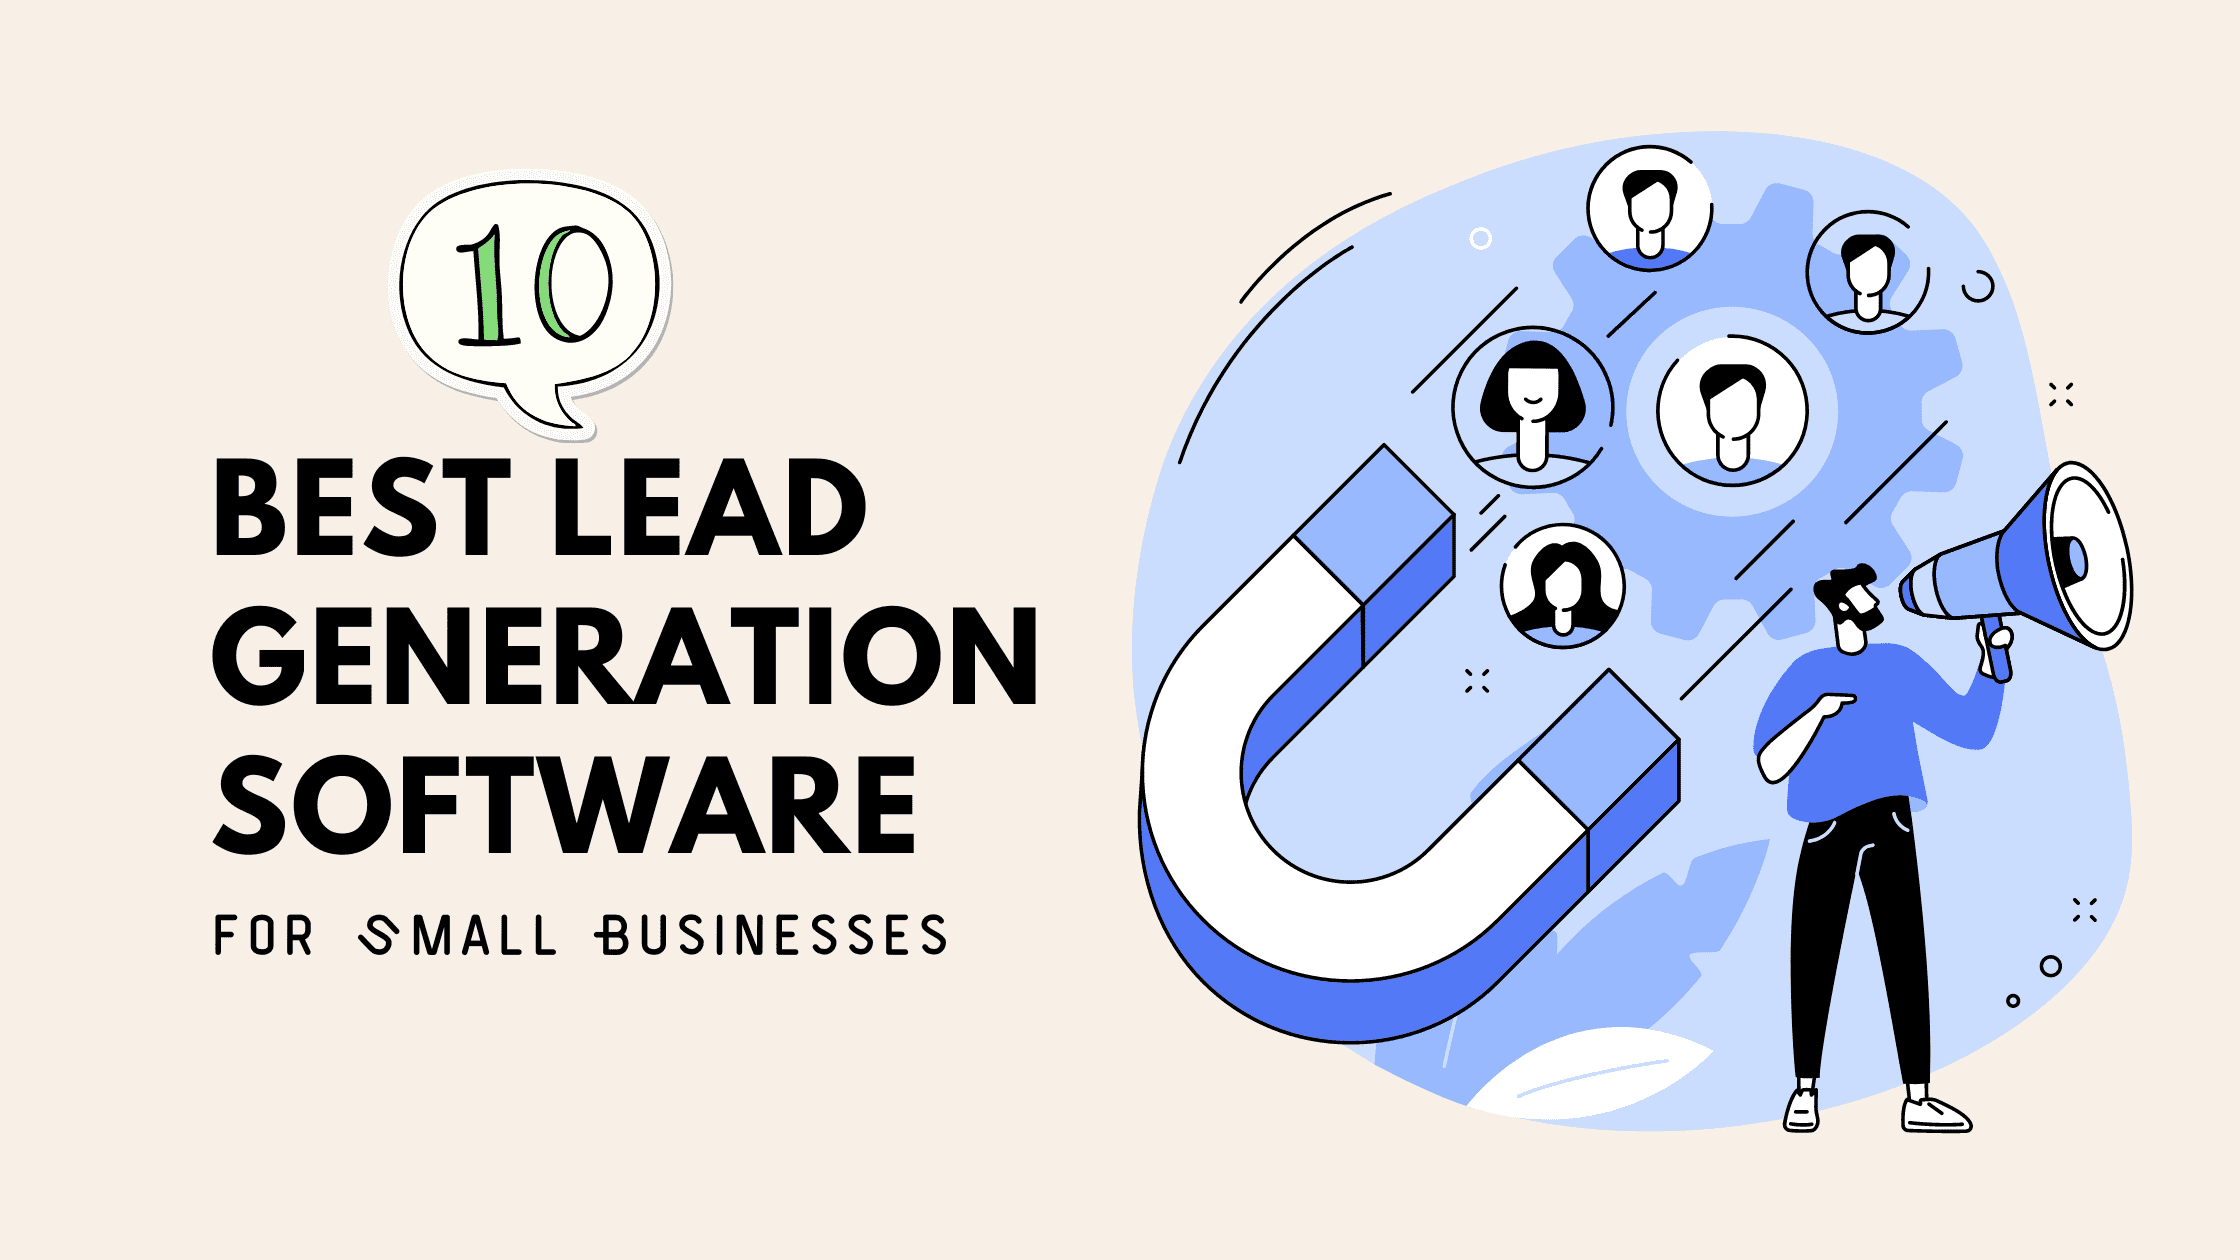 Best Lead Generation Software for Small Businesses